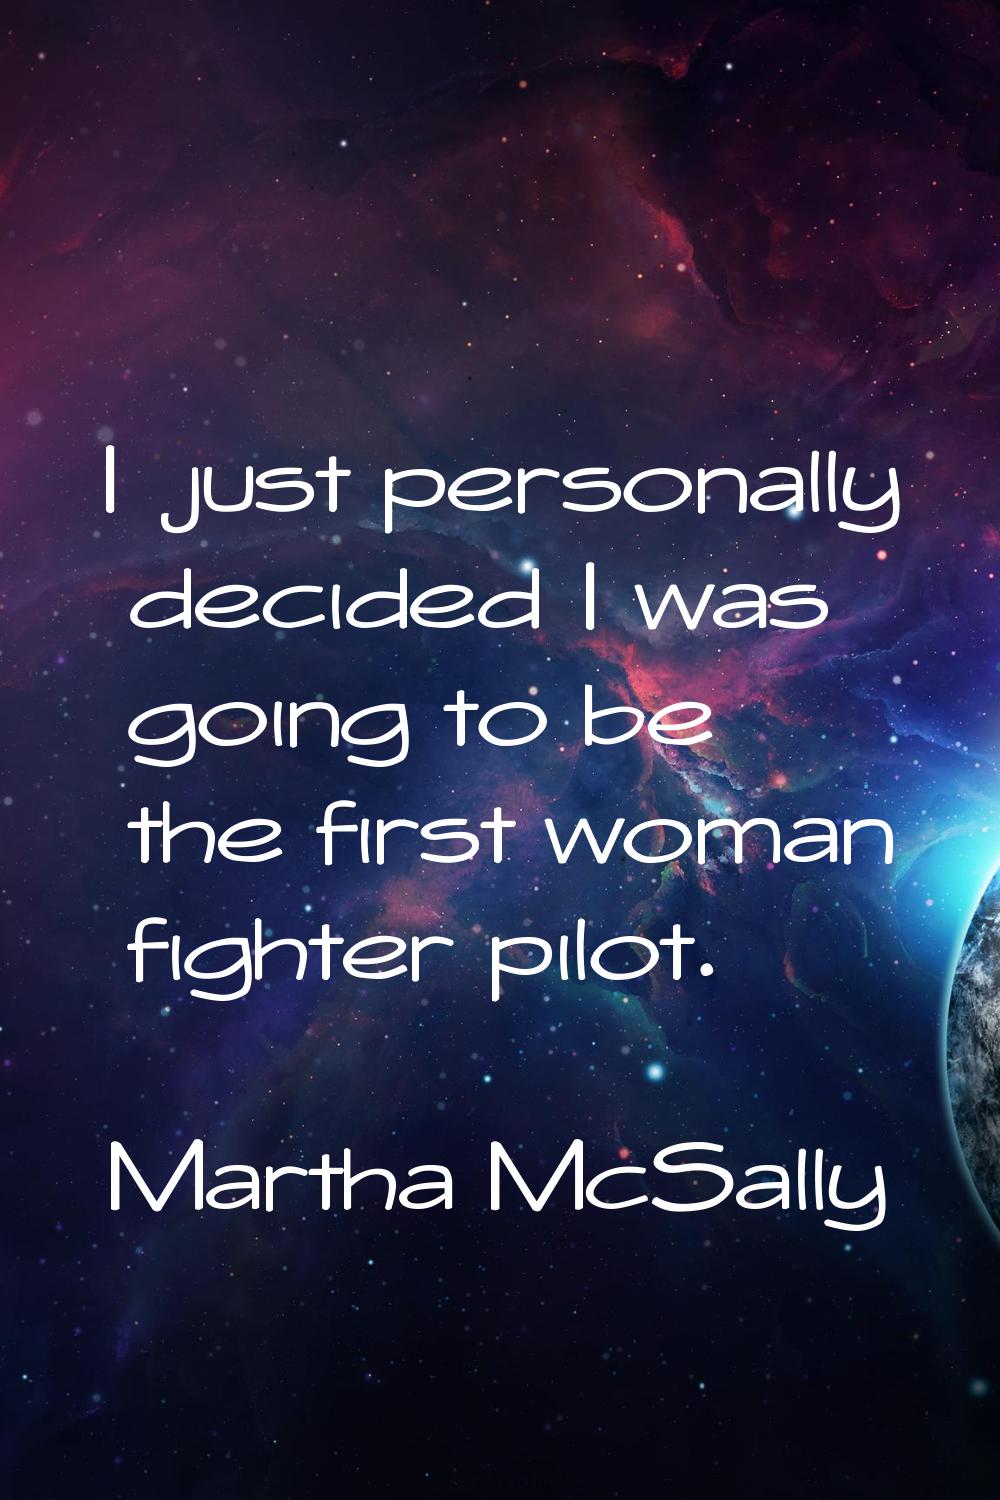 I just personally decided I was going to be the first woman fighter pilot.